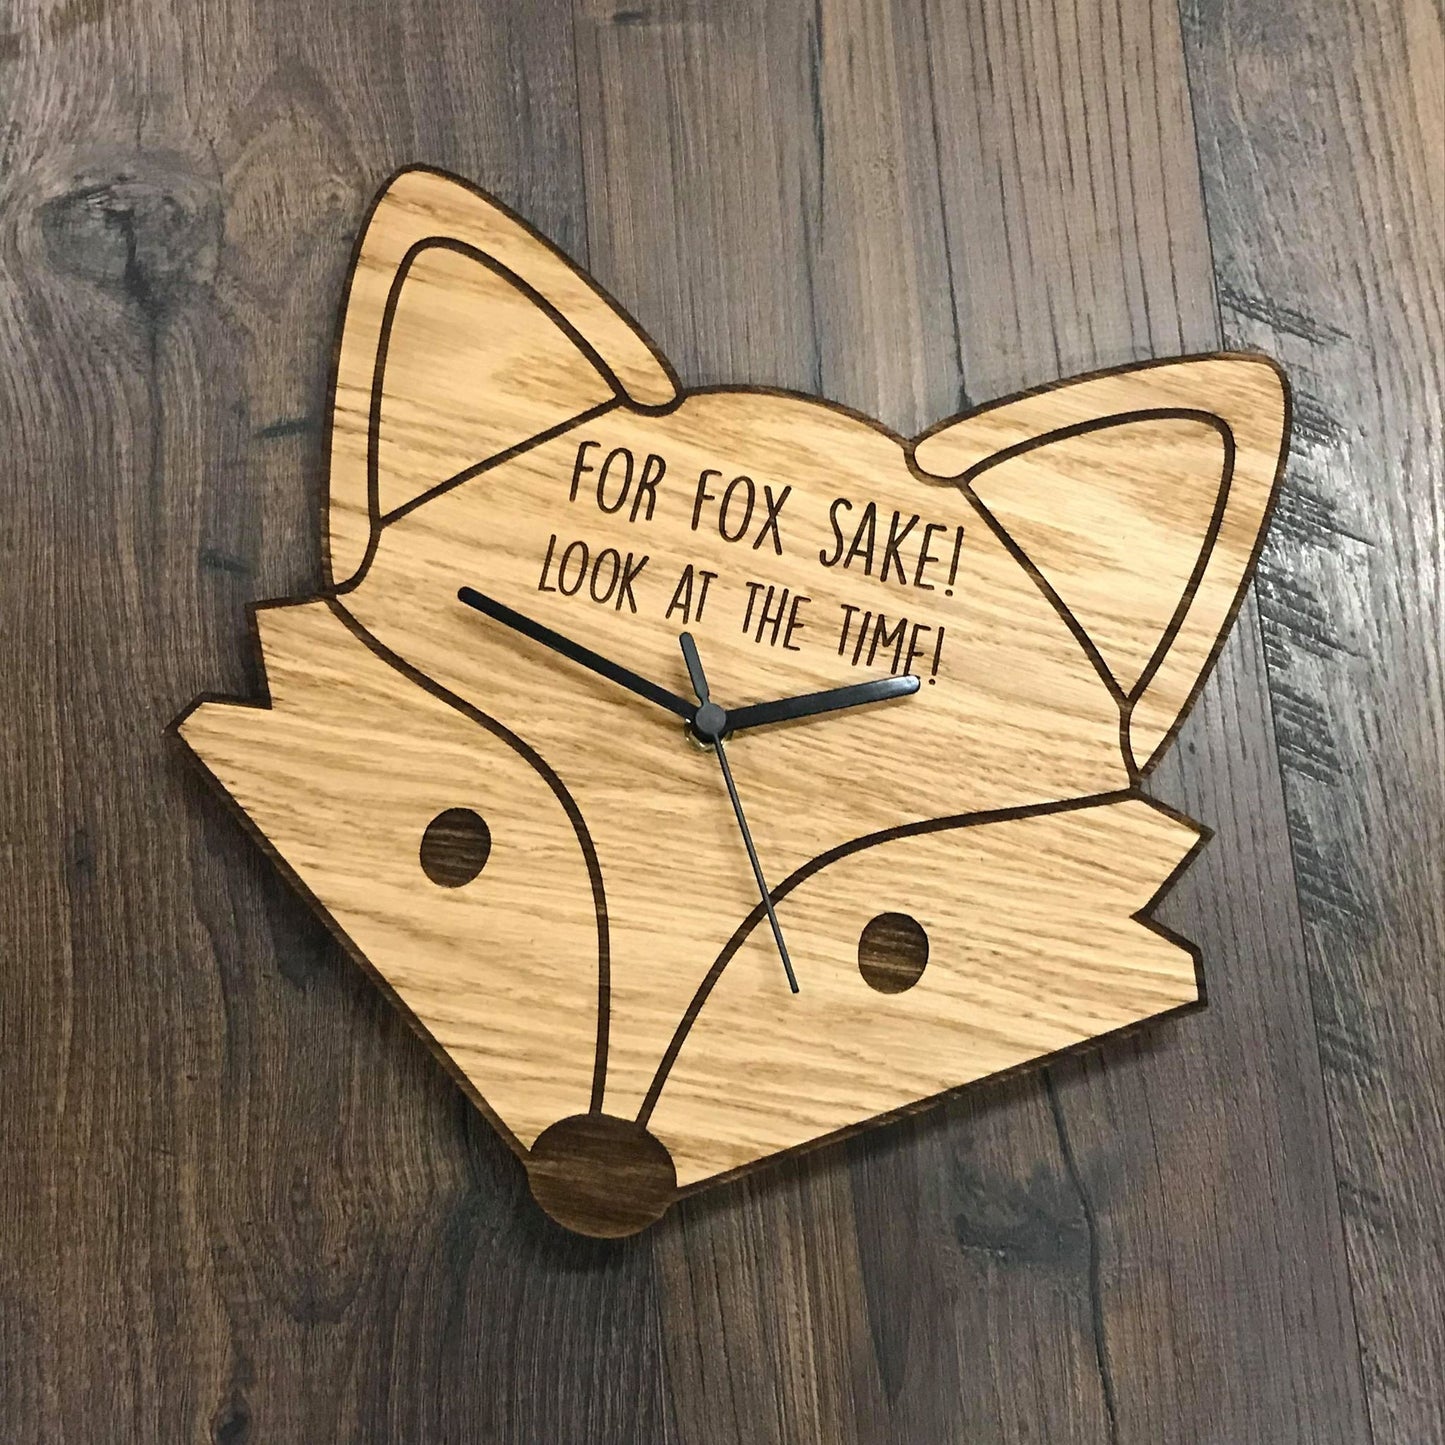 Wooden Fox Clock - Personalised Engraving - Made From Oak - Personalized Fox Lovers Gift Present For Fox Sake